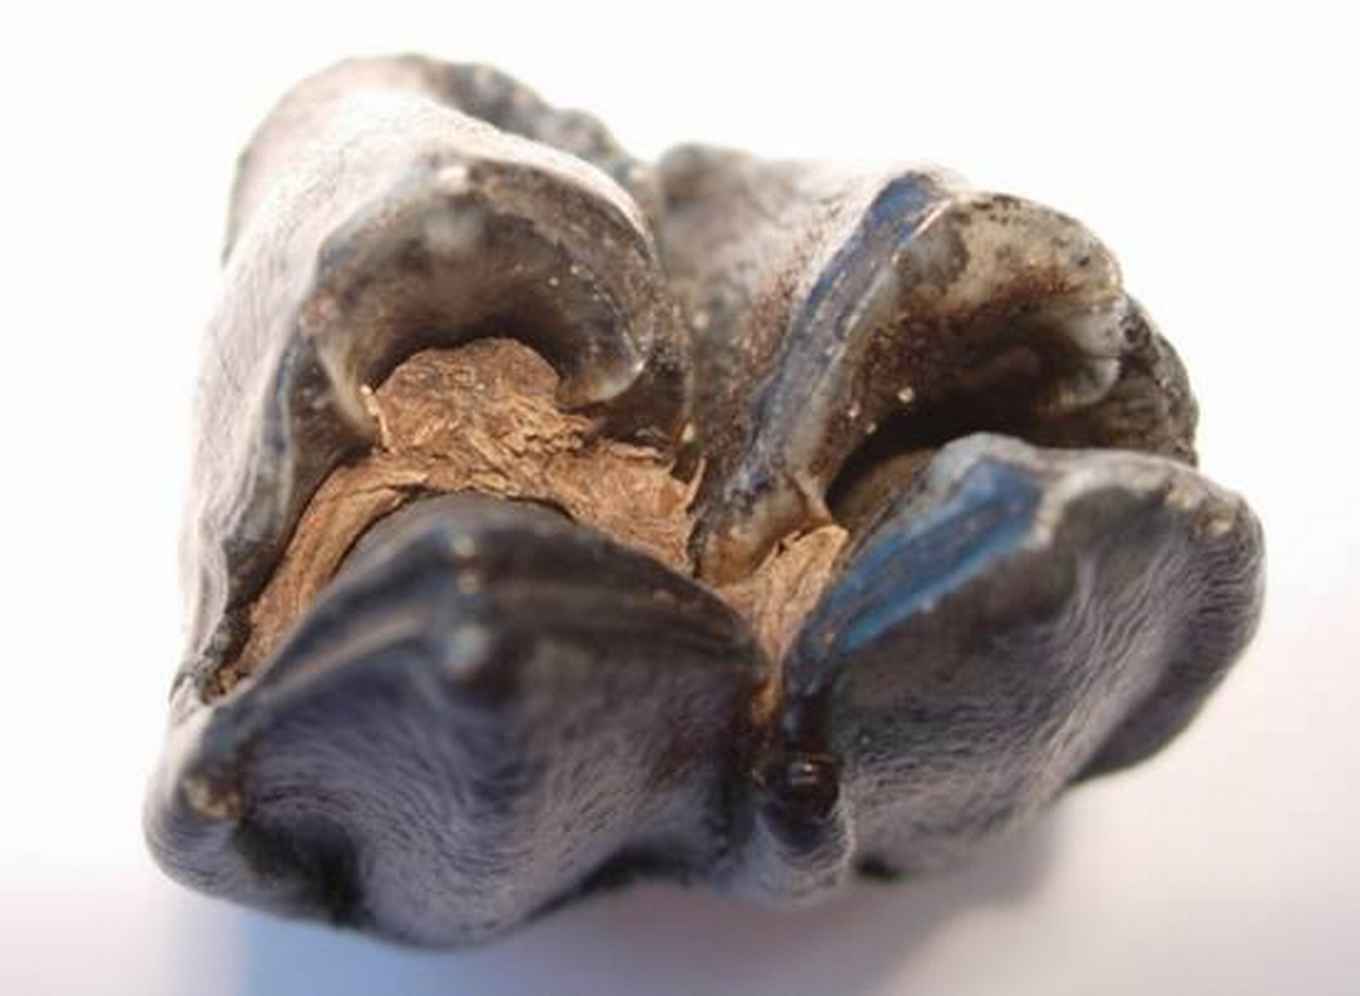 Giant deer molar that was found in sandy deposits from the bottom of the North Sea. The grinding surface shows light brown plant remains in folds.